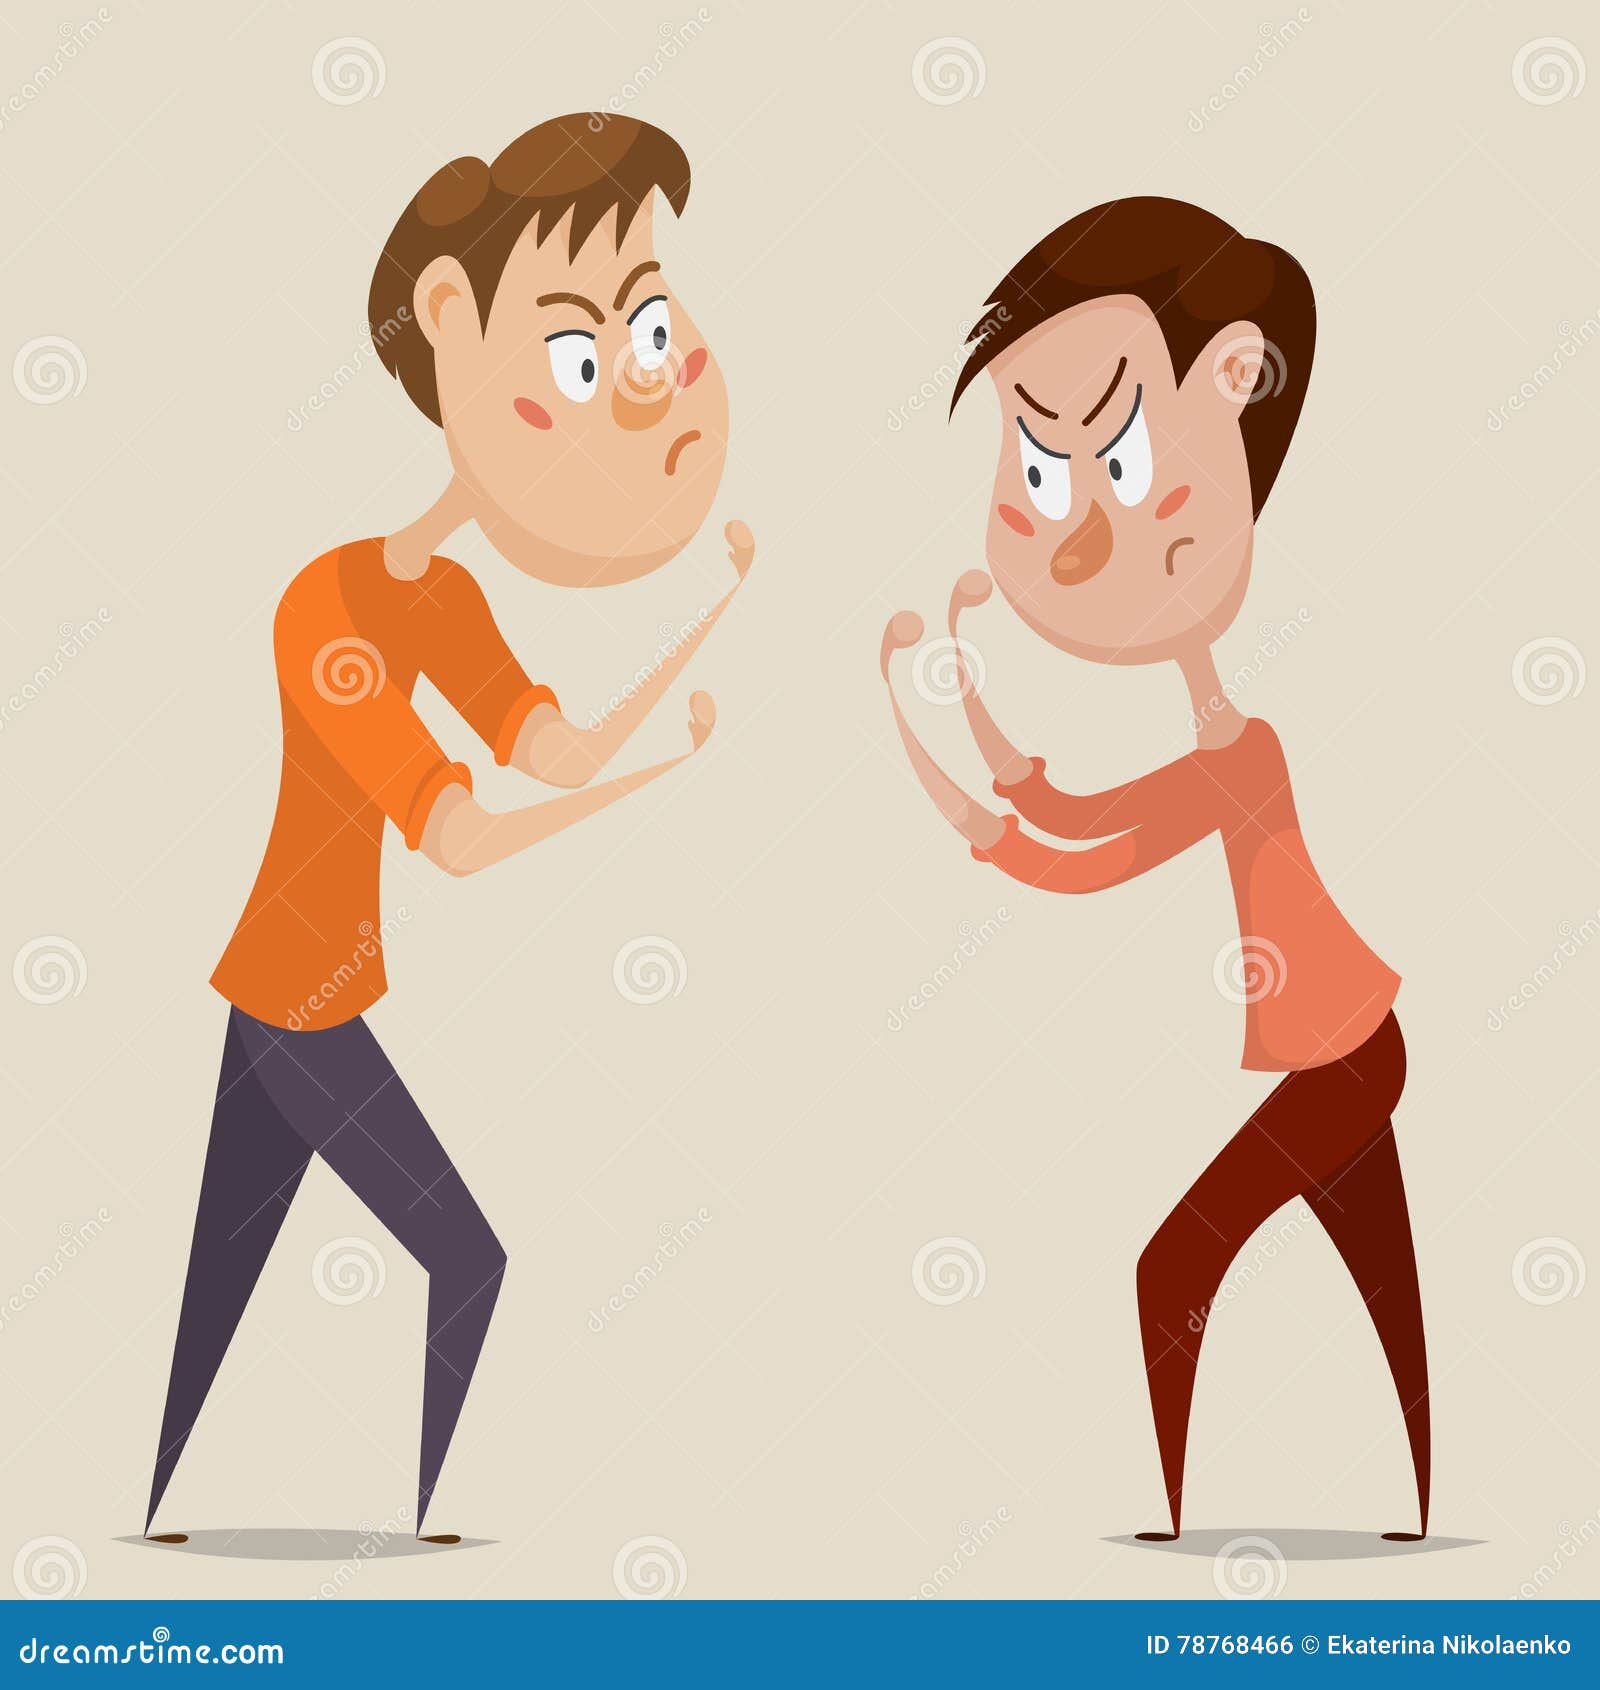 two angry men quarrel and fight. emotional concept of aggression and conflict.